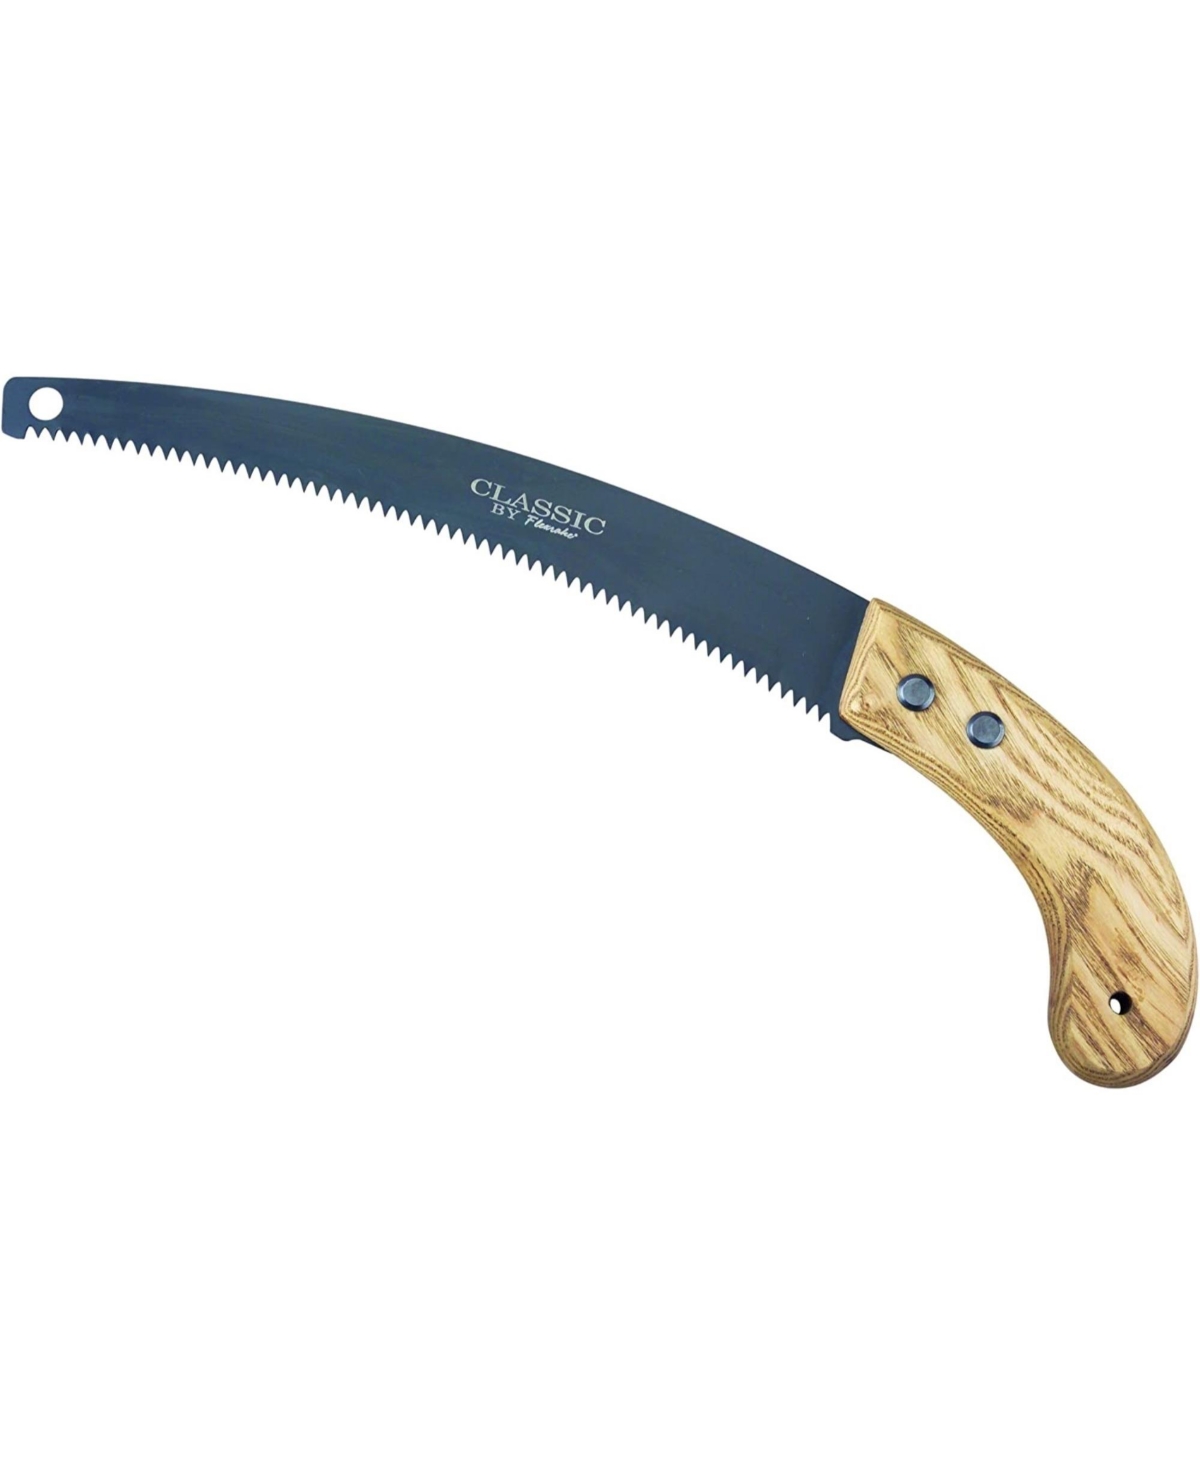 Classic Wooden Handled Pruning Saw for Gardening and Lawnwork, 10 Inches - Multi